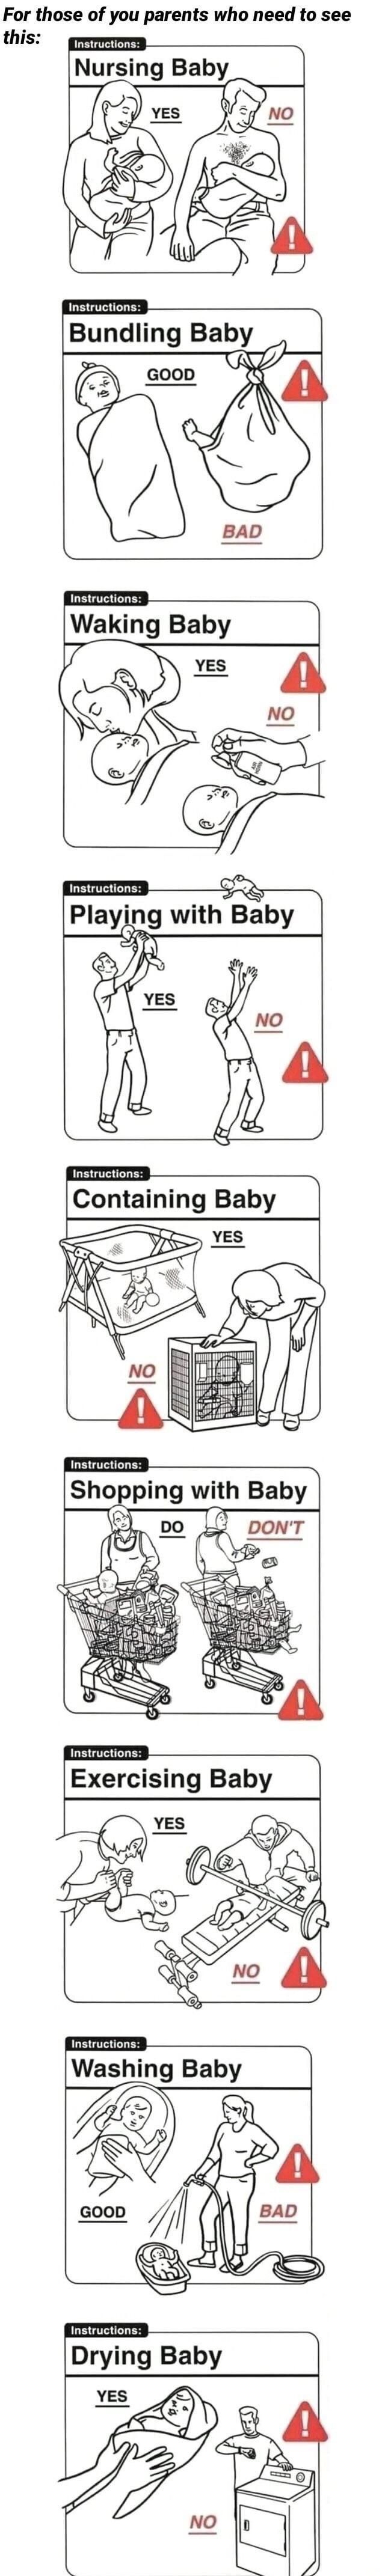 Parenting guide